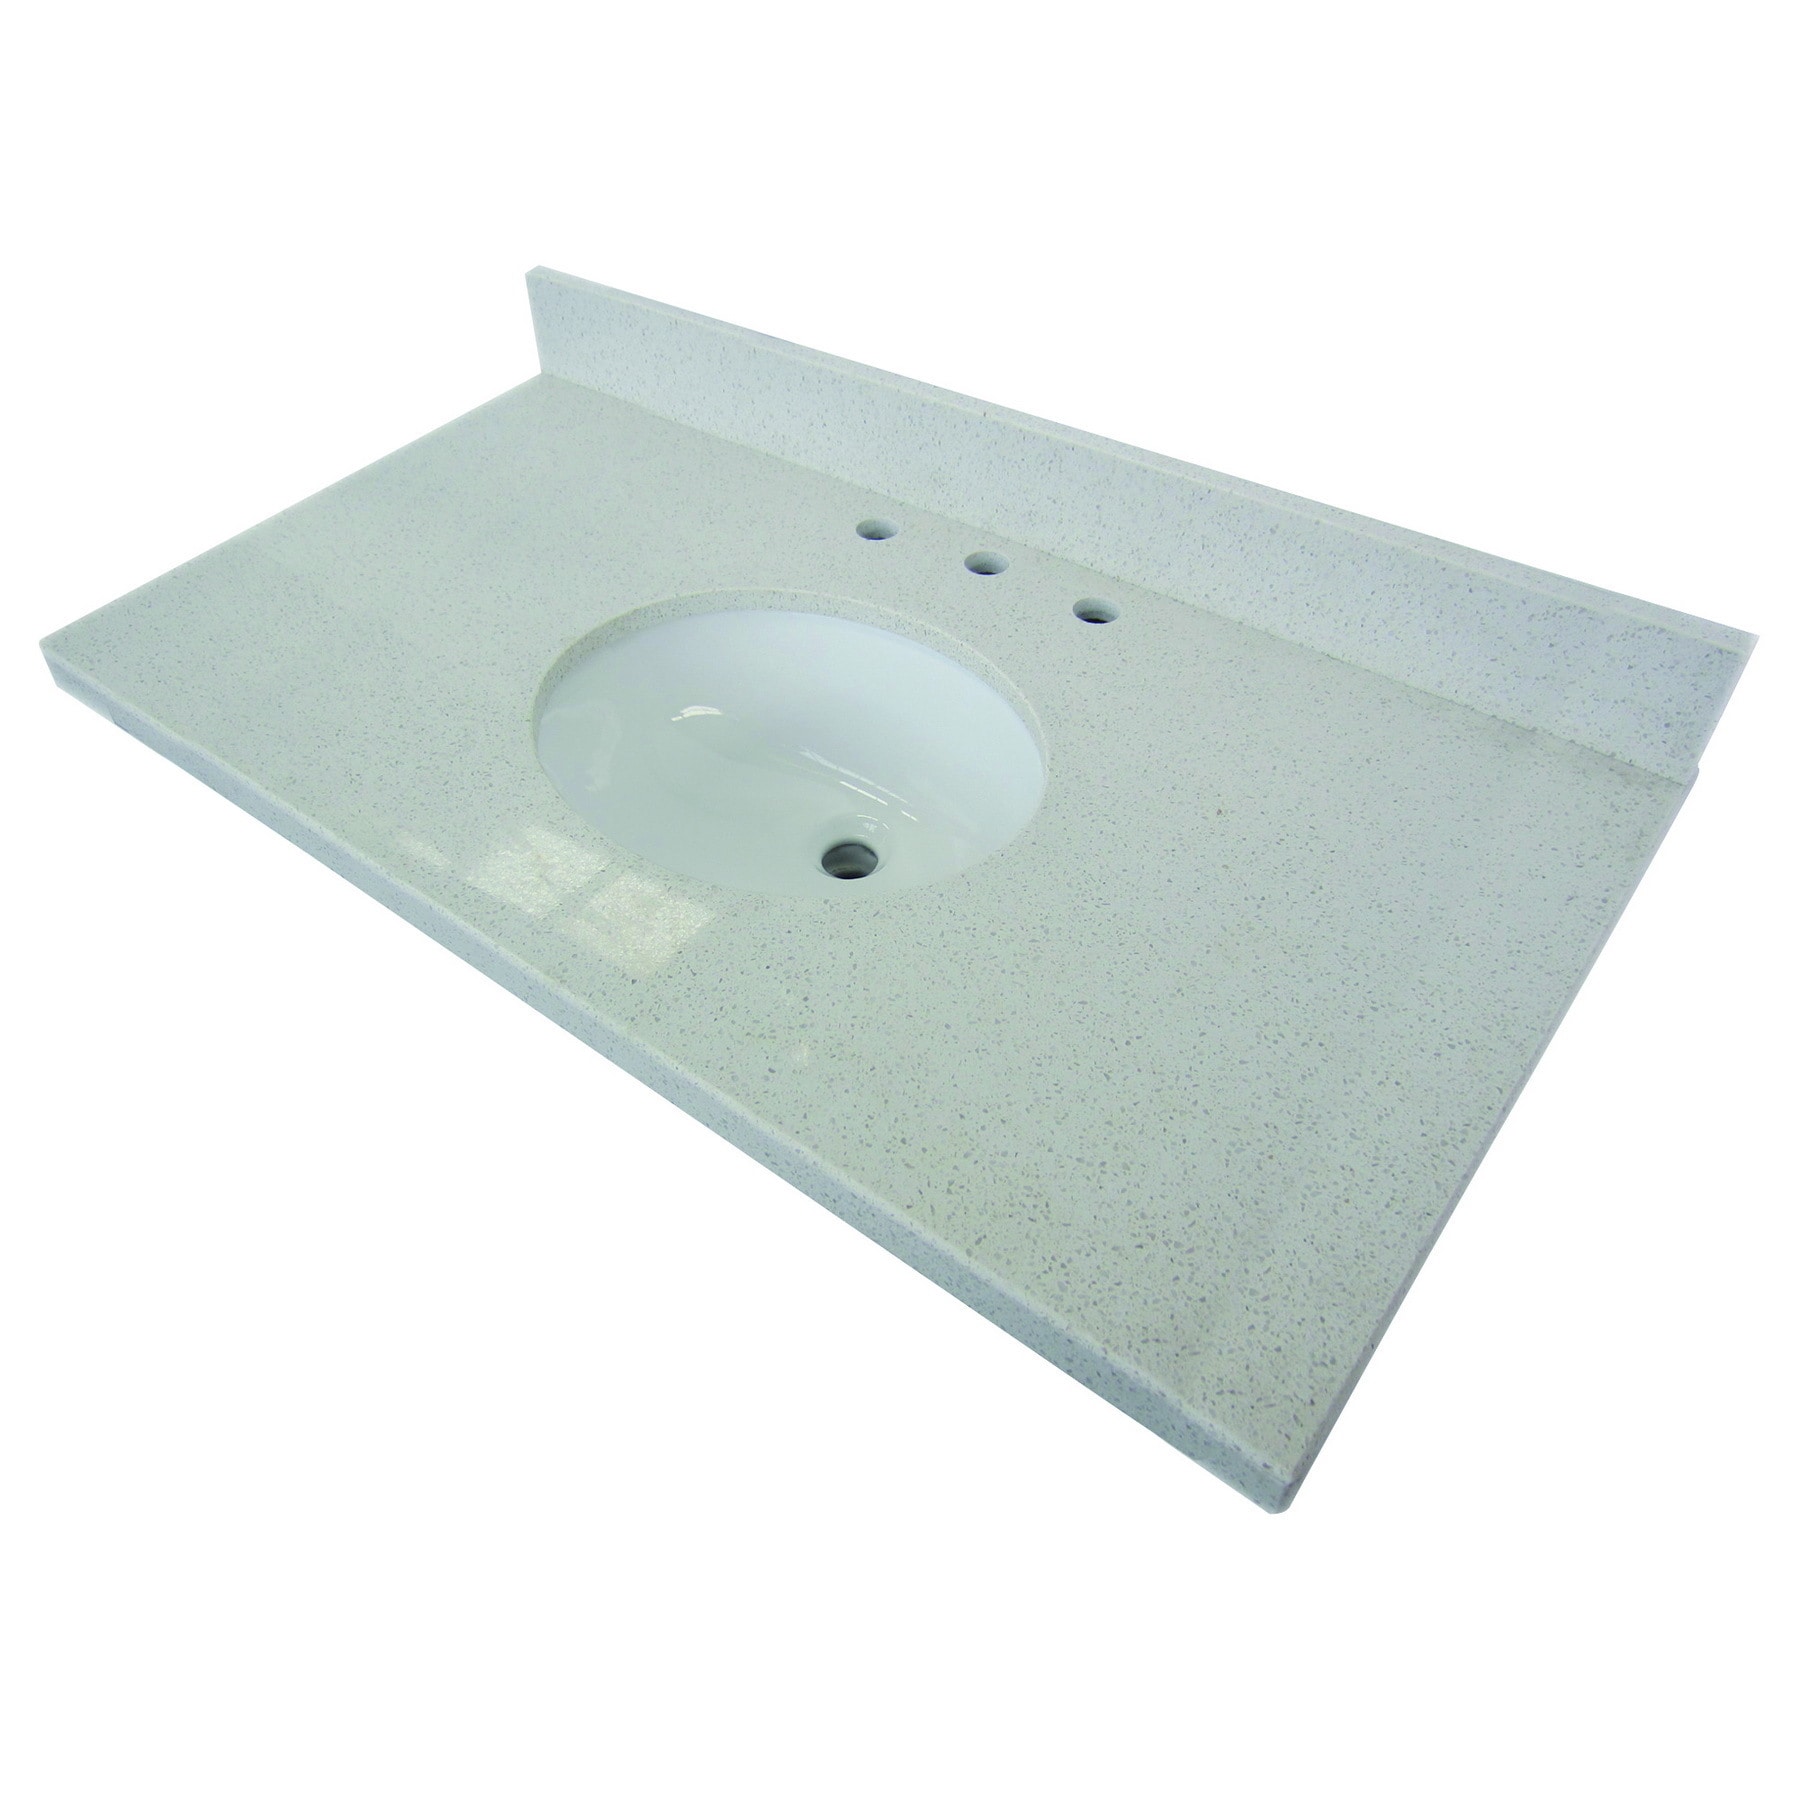 White Quartz 36 Inch Vanity Top With Undermount Sink 0b28a1e5 C722 41d3 9378 A941f97257ac 